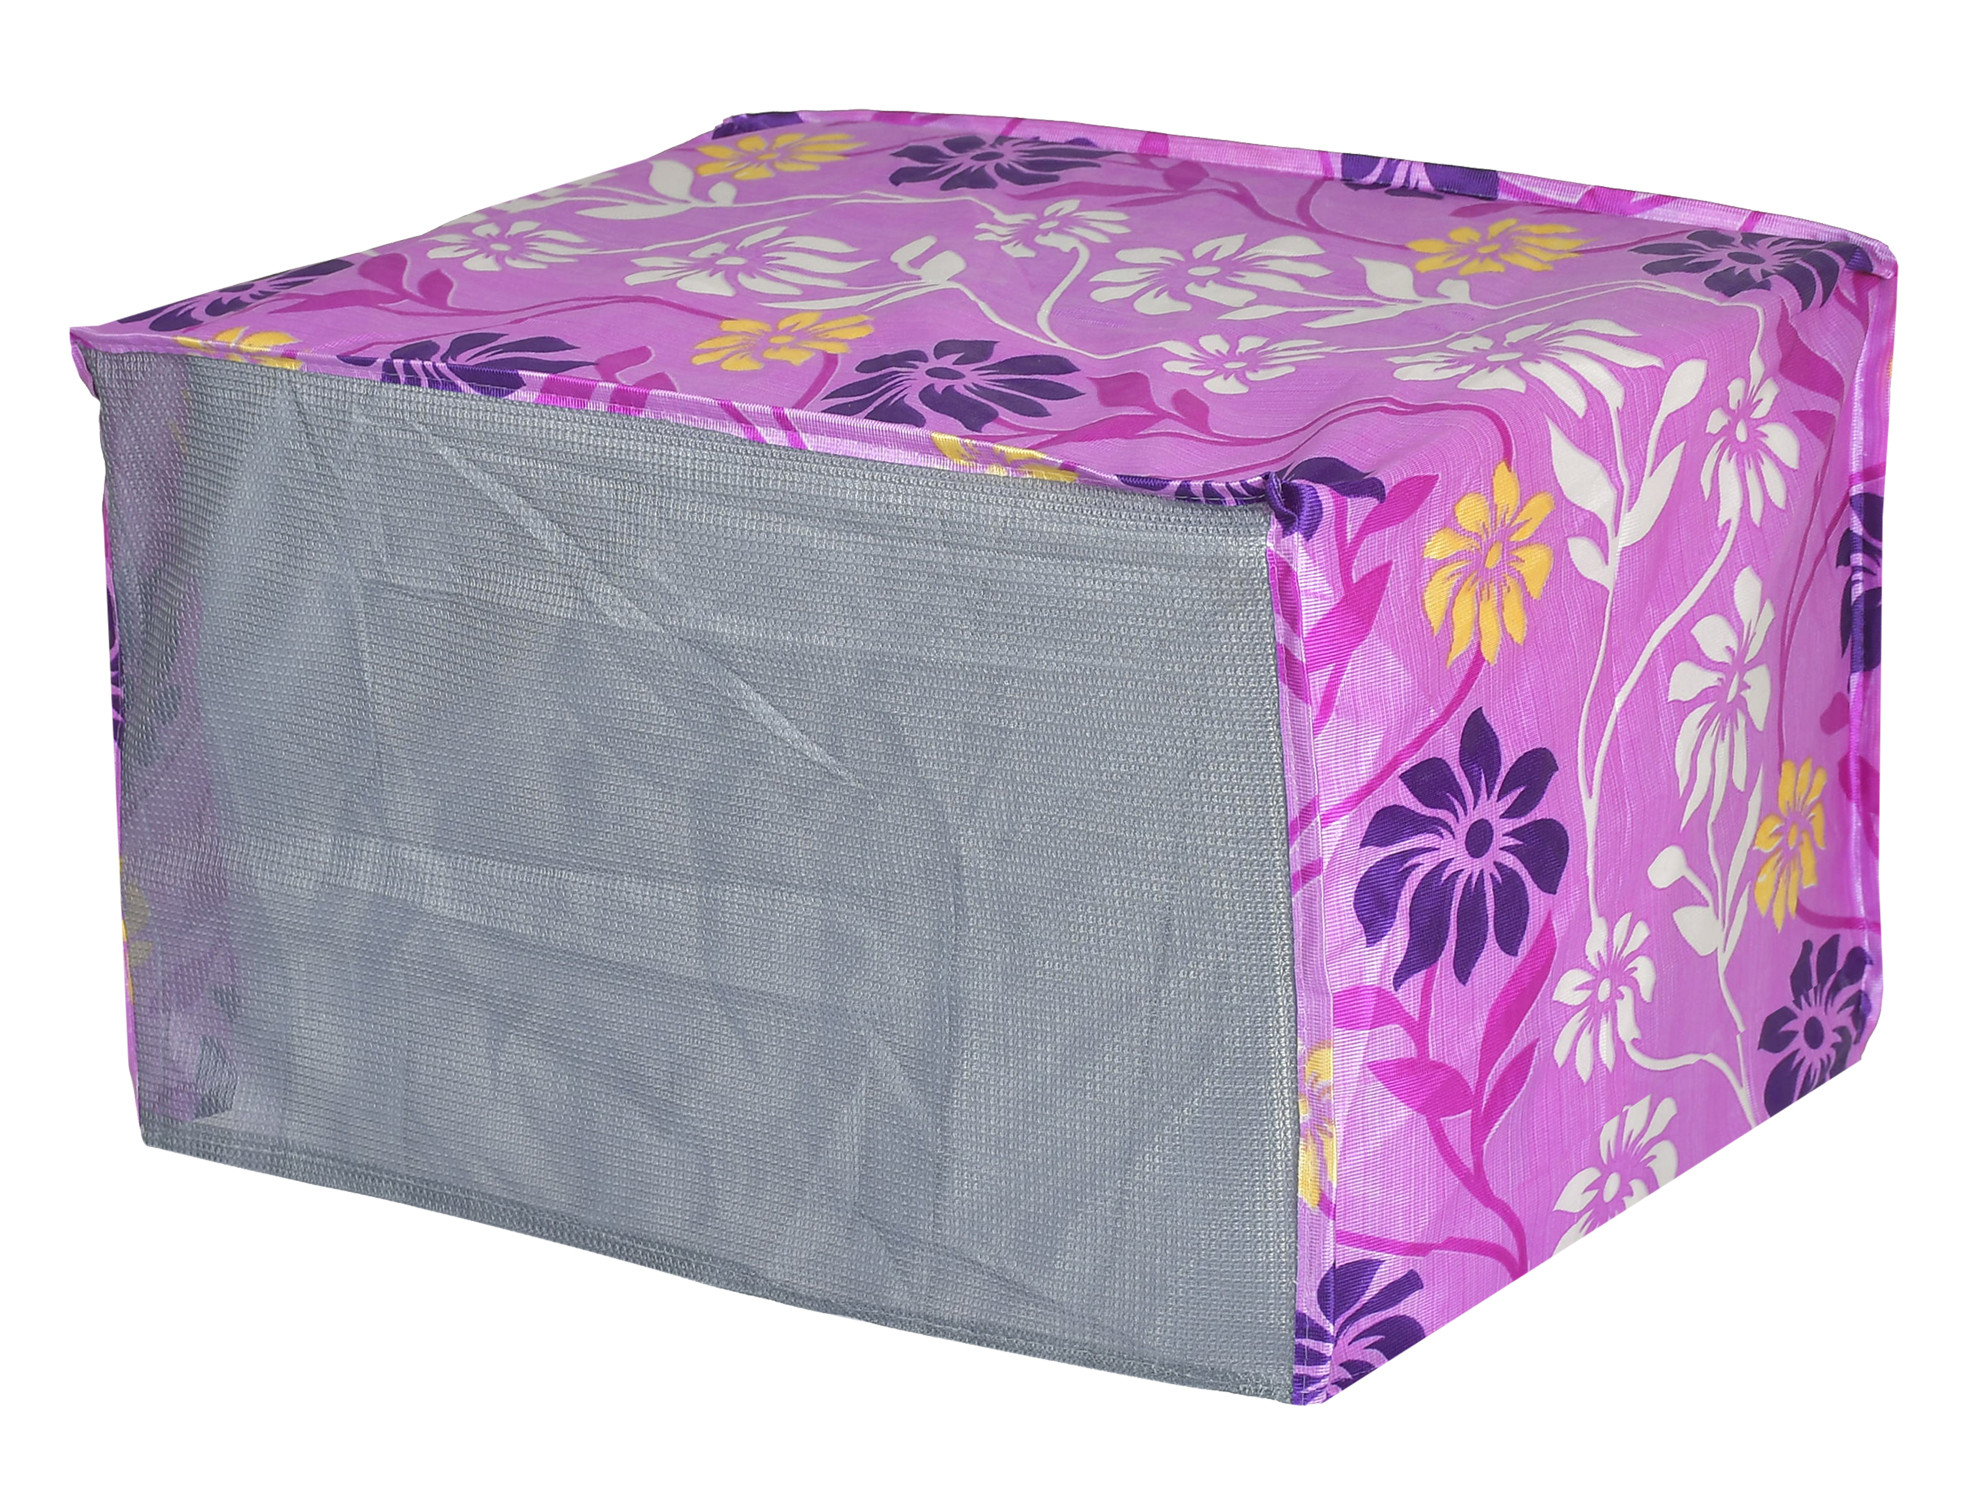 Kuber Industries Polyster Flower Printed Microwave Oven Cover,20 Ltr. (Pink)-HS43KUBMART25905